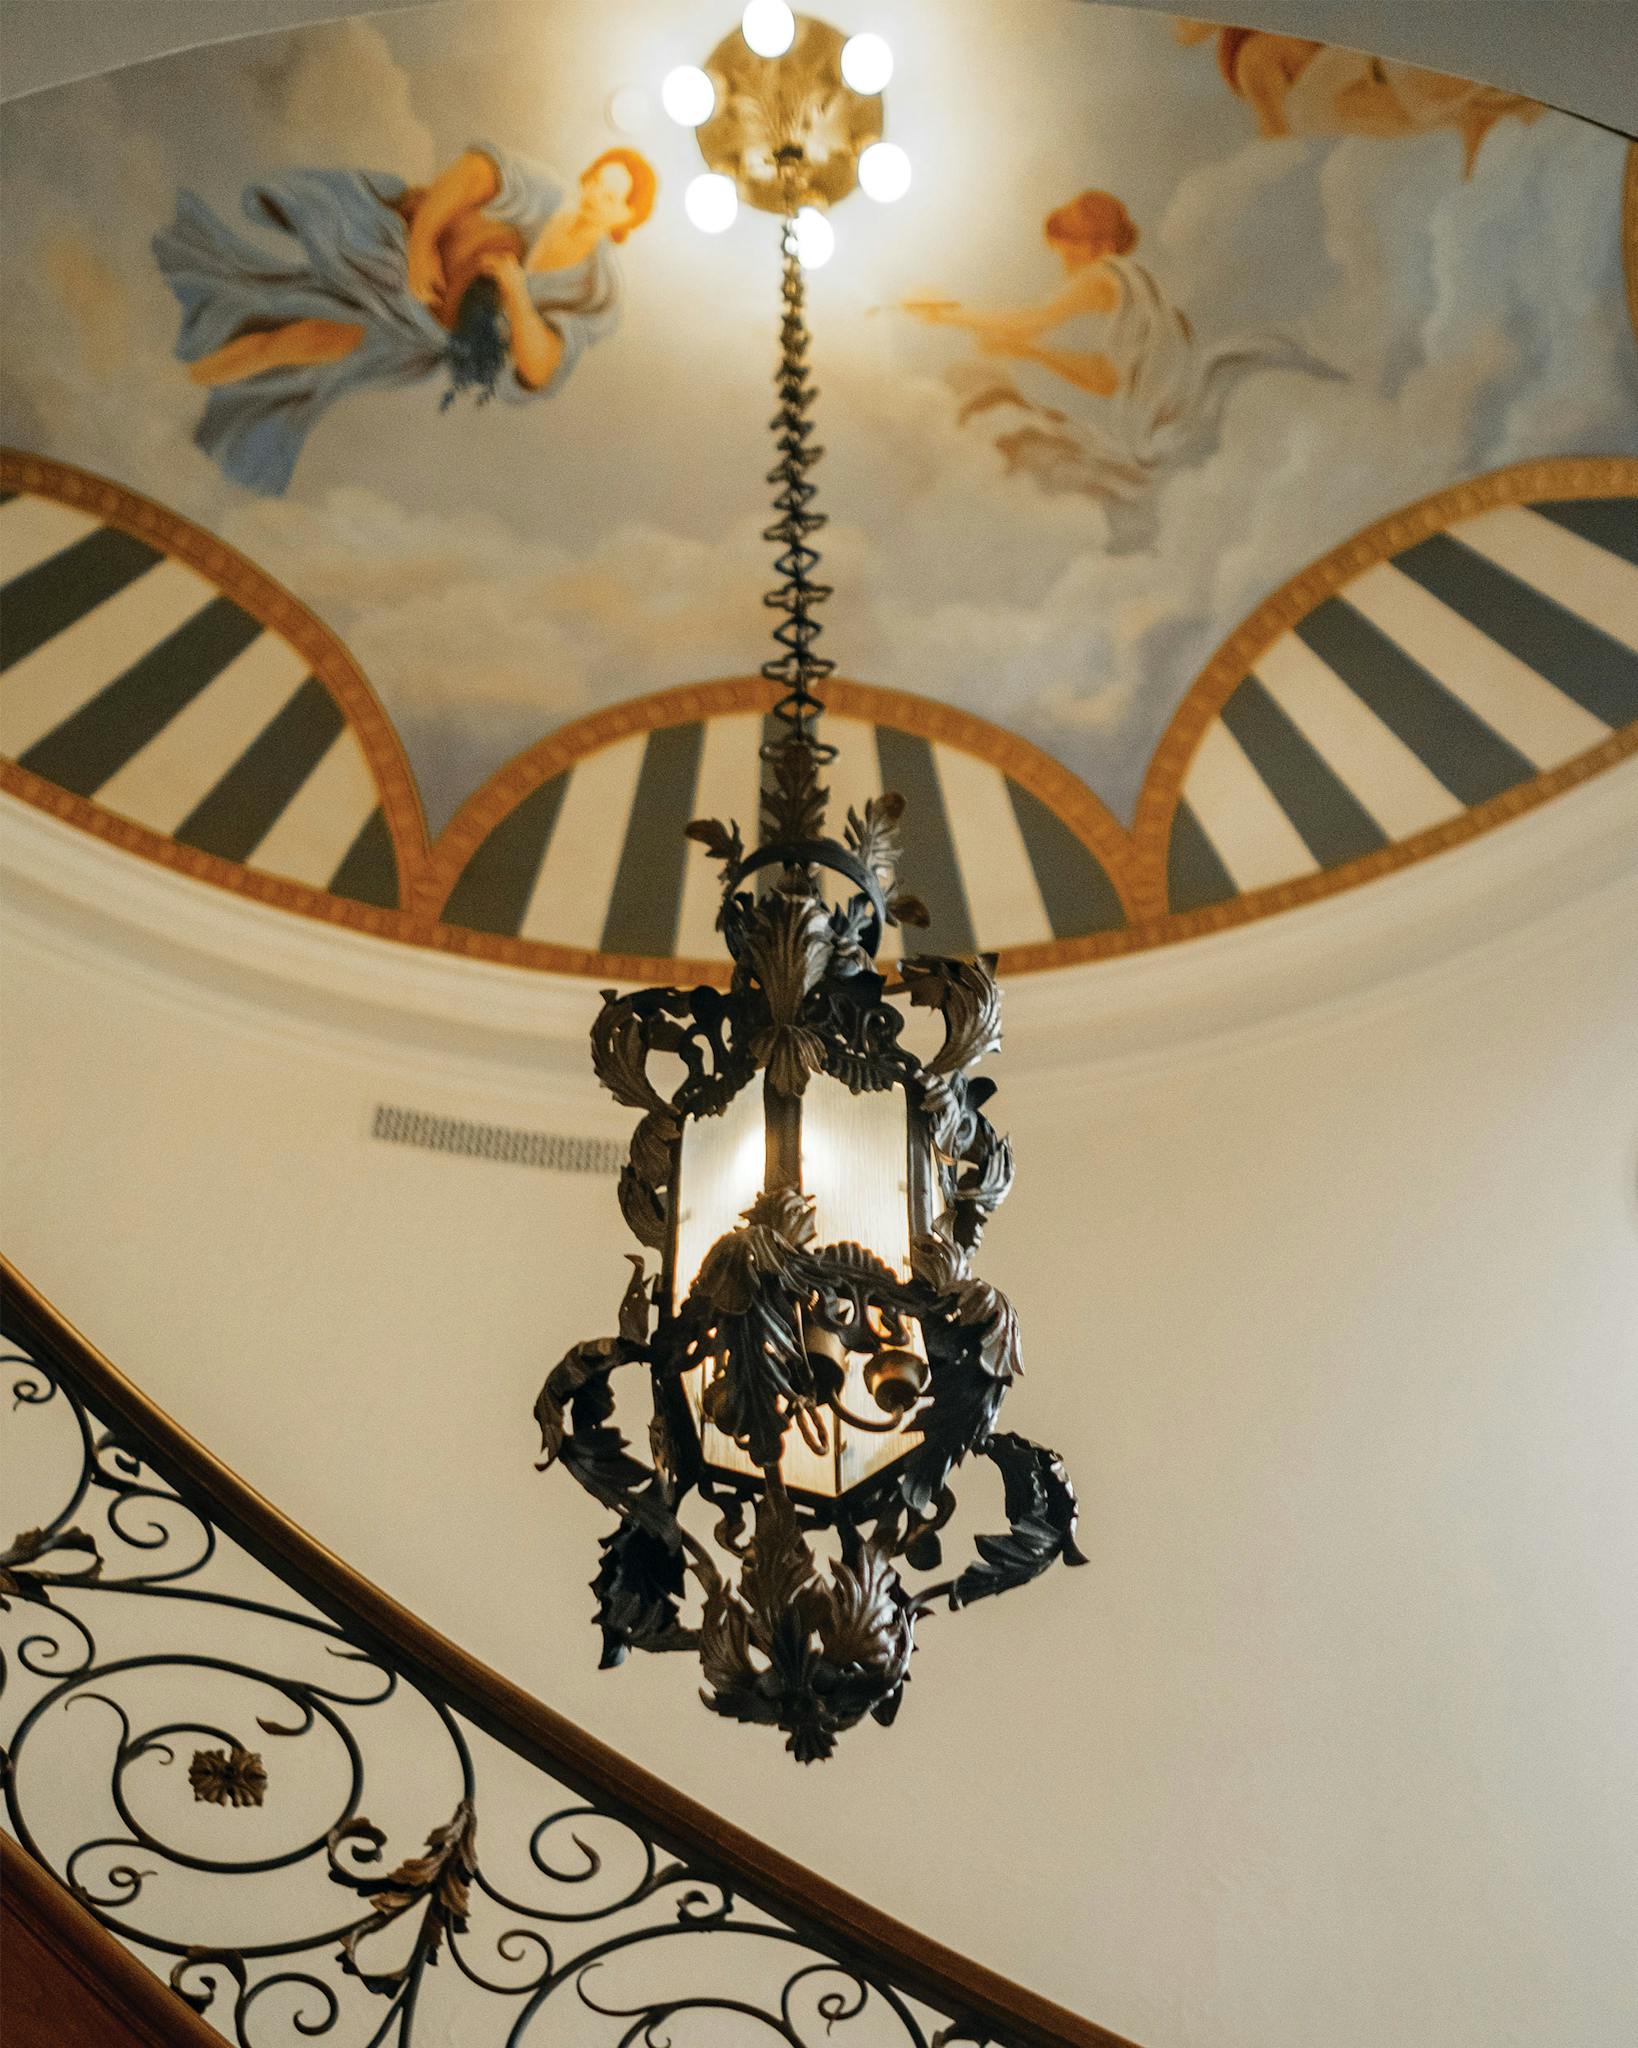 Walking into the Inn, a larger-than-life hand-painted mural depicts a pastoral, bluebonnet-speckled scene that re-creates the experience of looking out on the Hill Country in springtime. In the mansion, though, this mural atop the original spiral staircase is decidedly more ethereal.